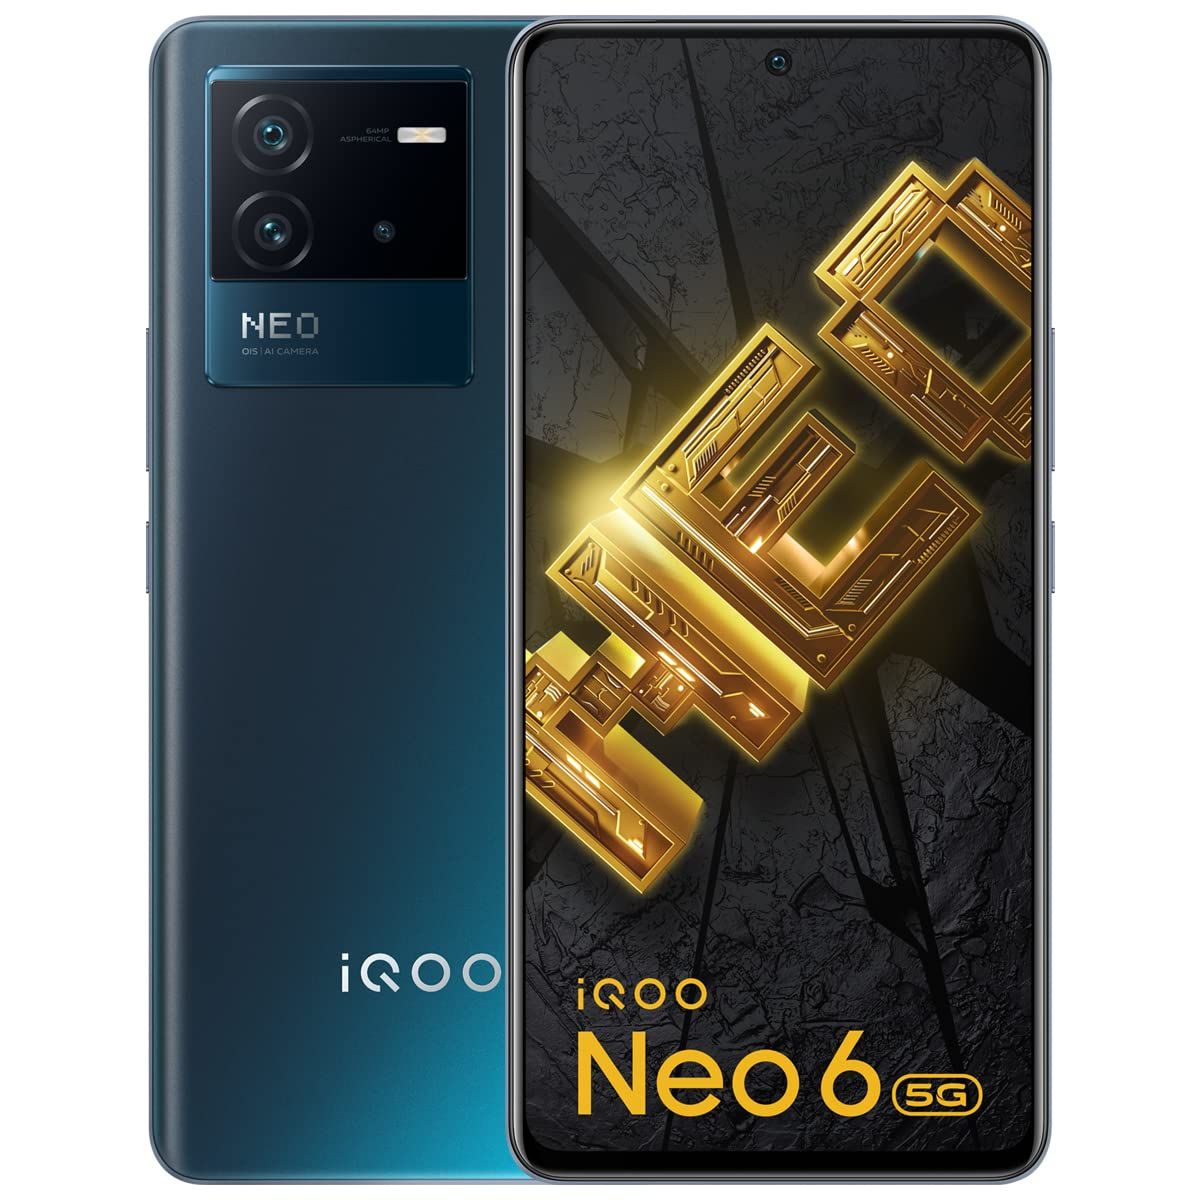 The iQOO Neo 6 is an affordable flagship featuring Qualcomm's Snapdragon 870 chip and a 120Hz AMOLED display.